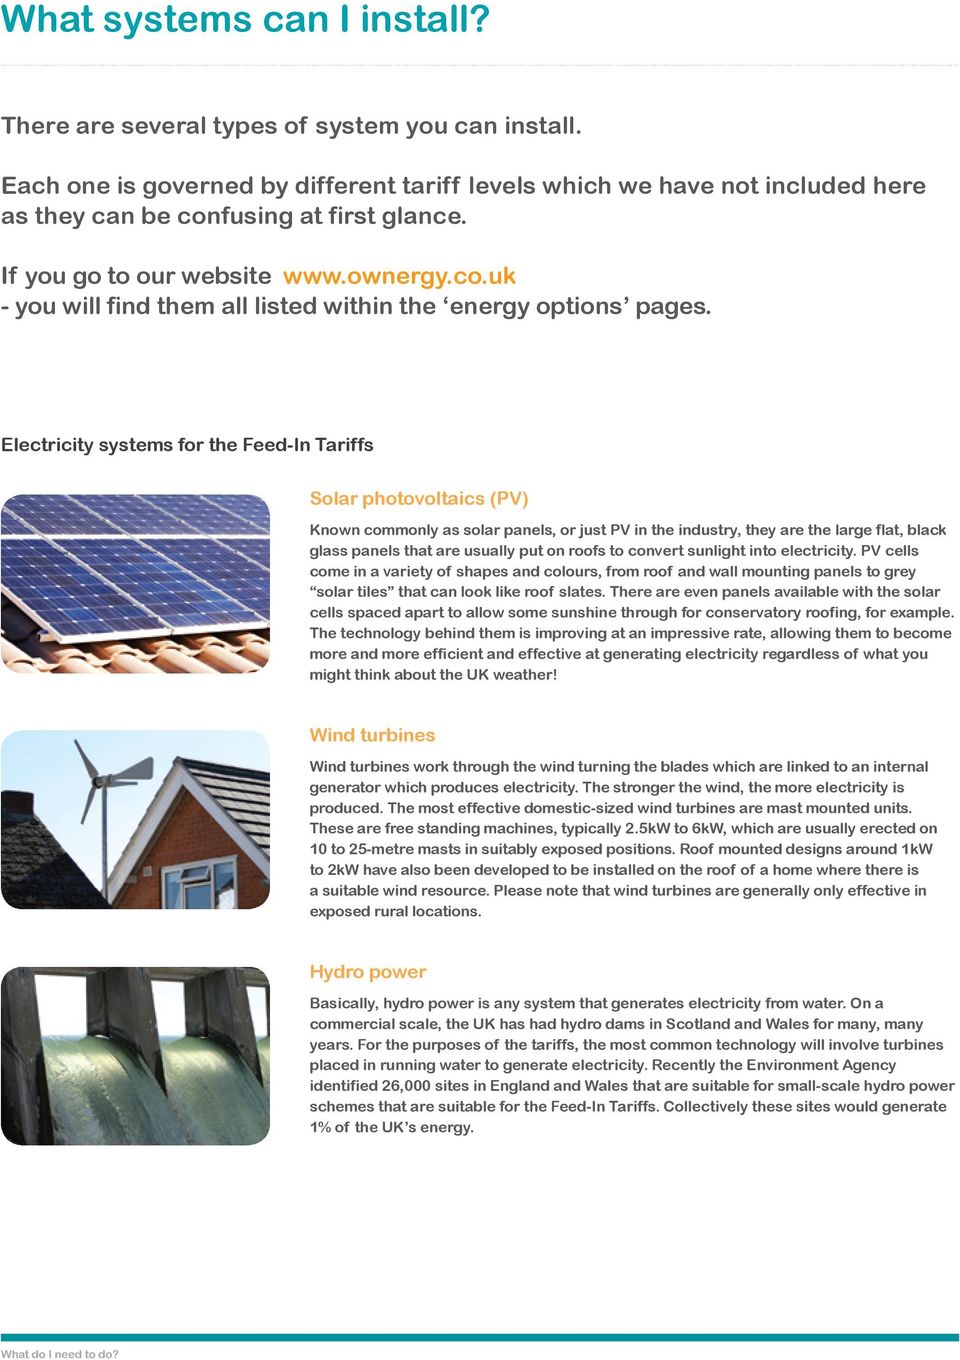 Electricity systems for the Feed-In Tariffs Solar photovoltaics (PV) Known commonly as solar panels, or just PV in the industry, they are the large flat, black glass panels that are usually put on